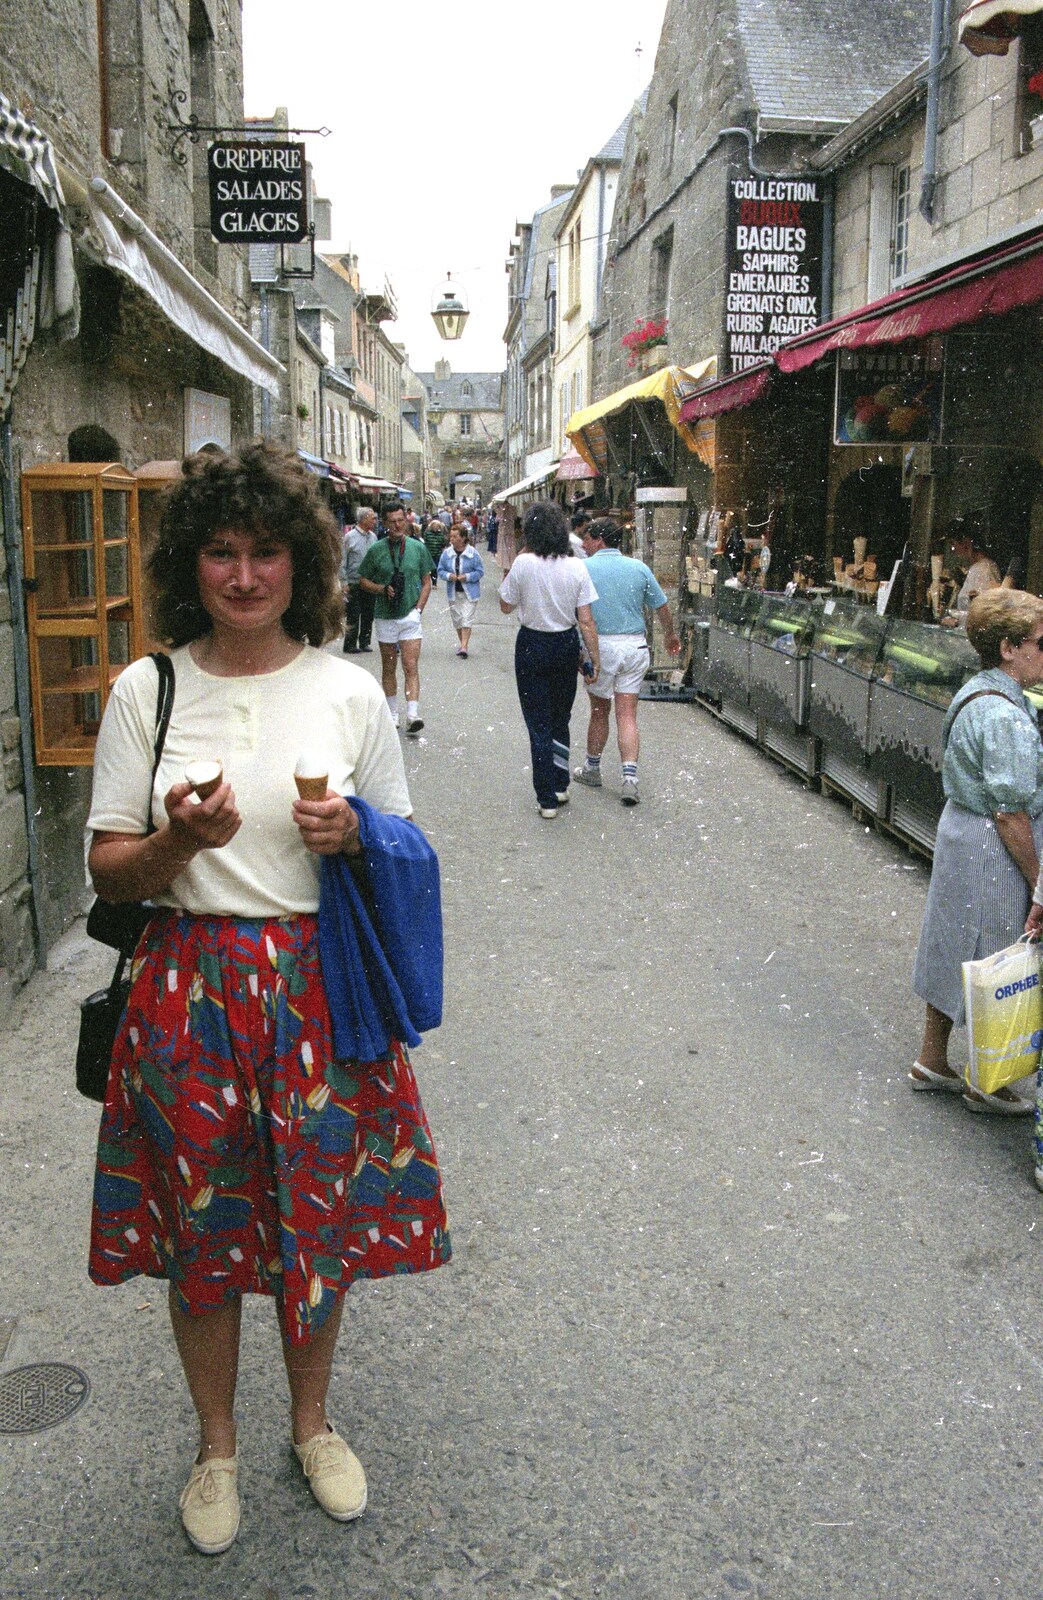 Angela holds our lemon sorbets from A Trip To Huelgoat, Brittany, France - 11th June 1990